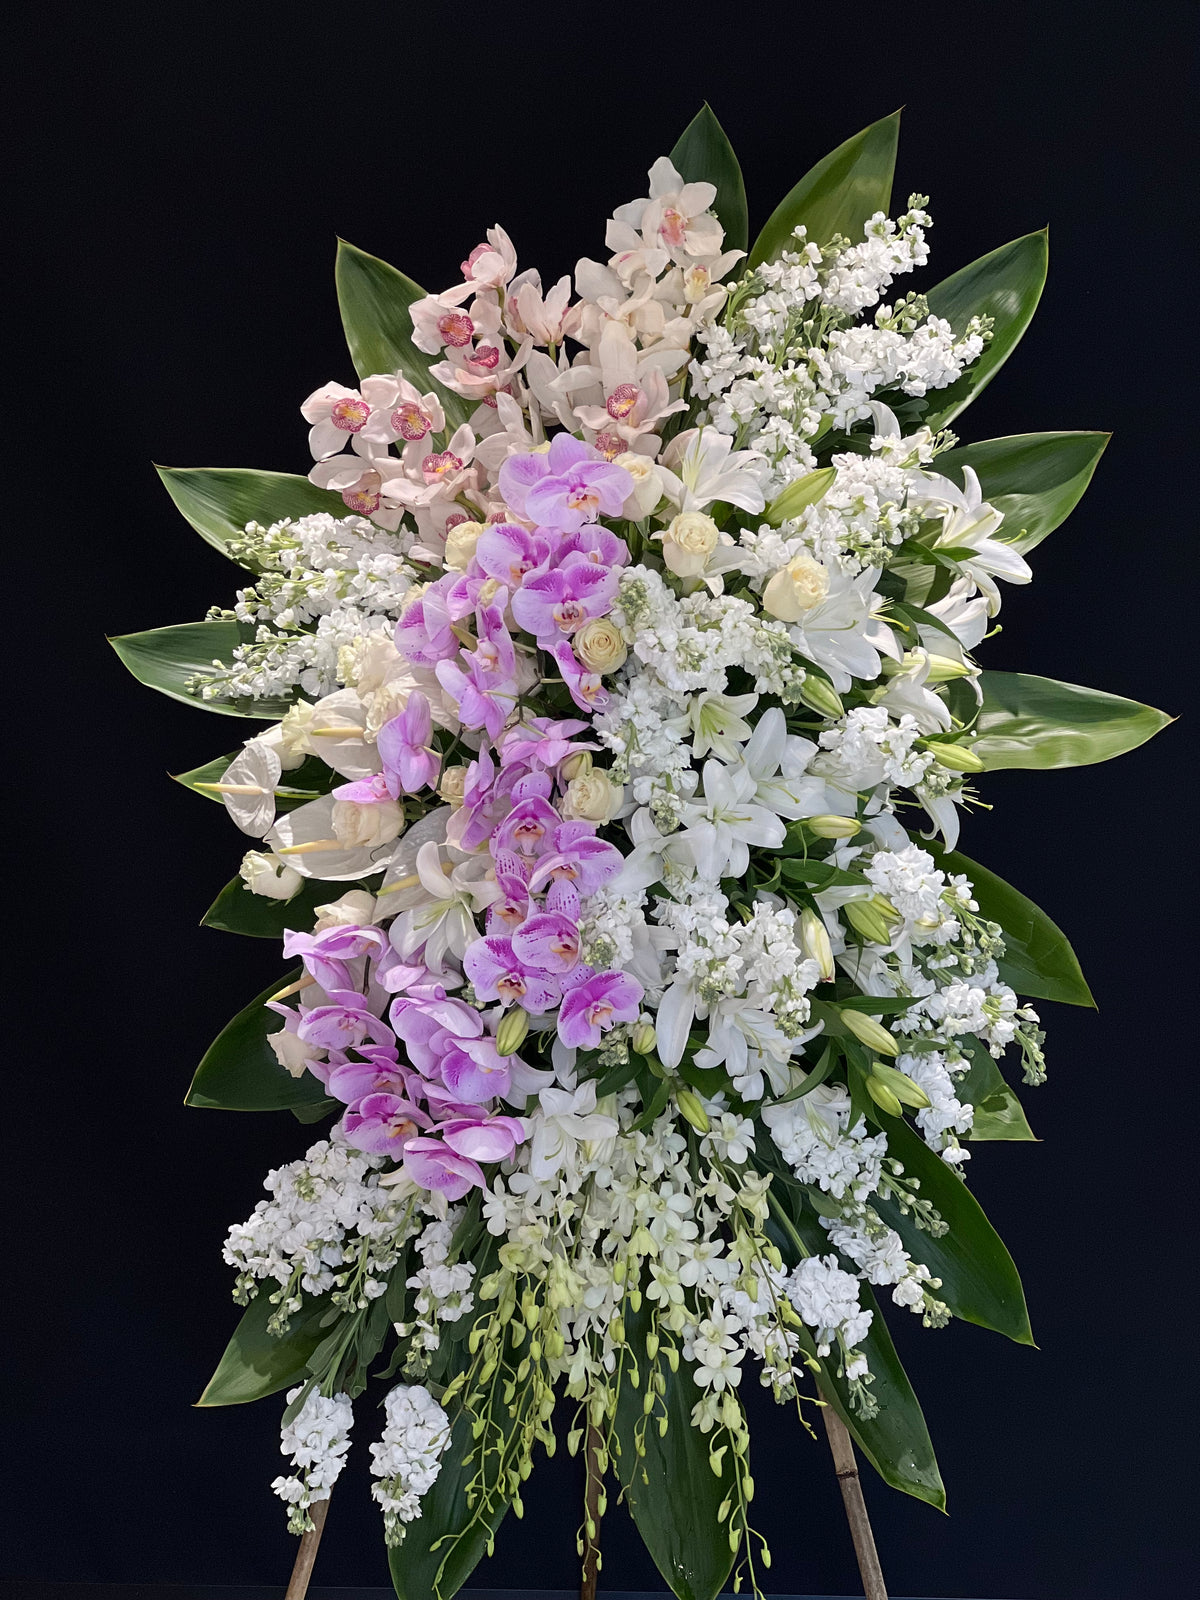 A tender standing floral spray in soft pink and white, featuring stocks, roses, cymbidium orchids, dendrobium orchids, lilies, and the exquisite addition of purple phalaenopsis orchids. A compassionate floral tribute from Yonge Florist, offering comfort and sympathy for funerals and memorial services. Available for local GTA delivery to funeral homes, churches, chapels, and mosques.